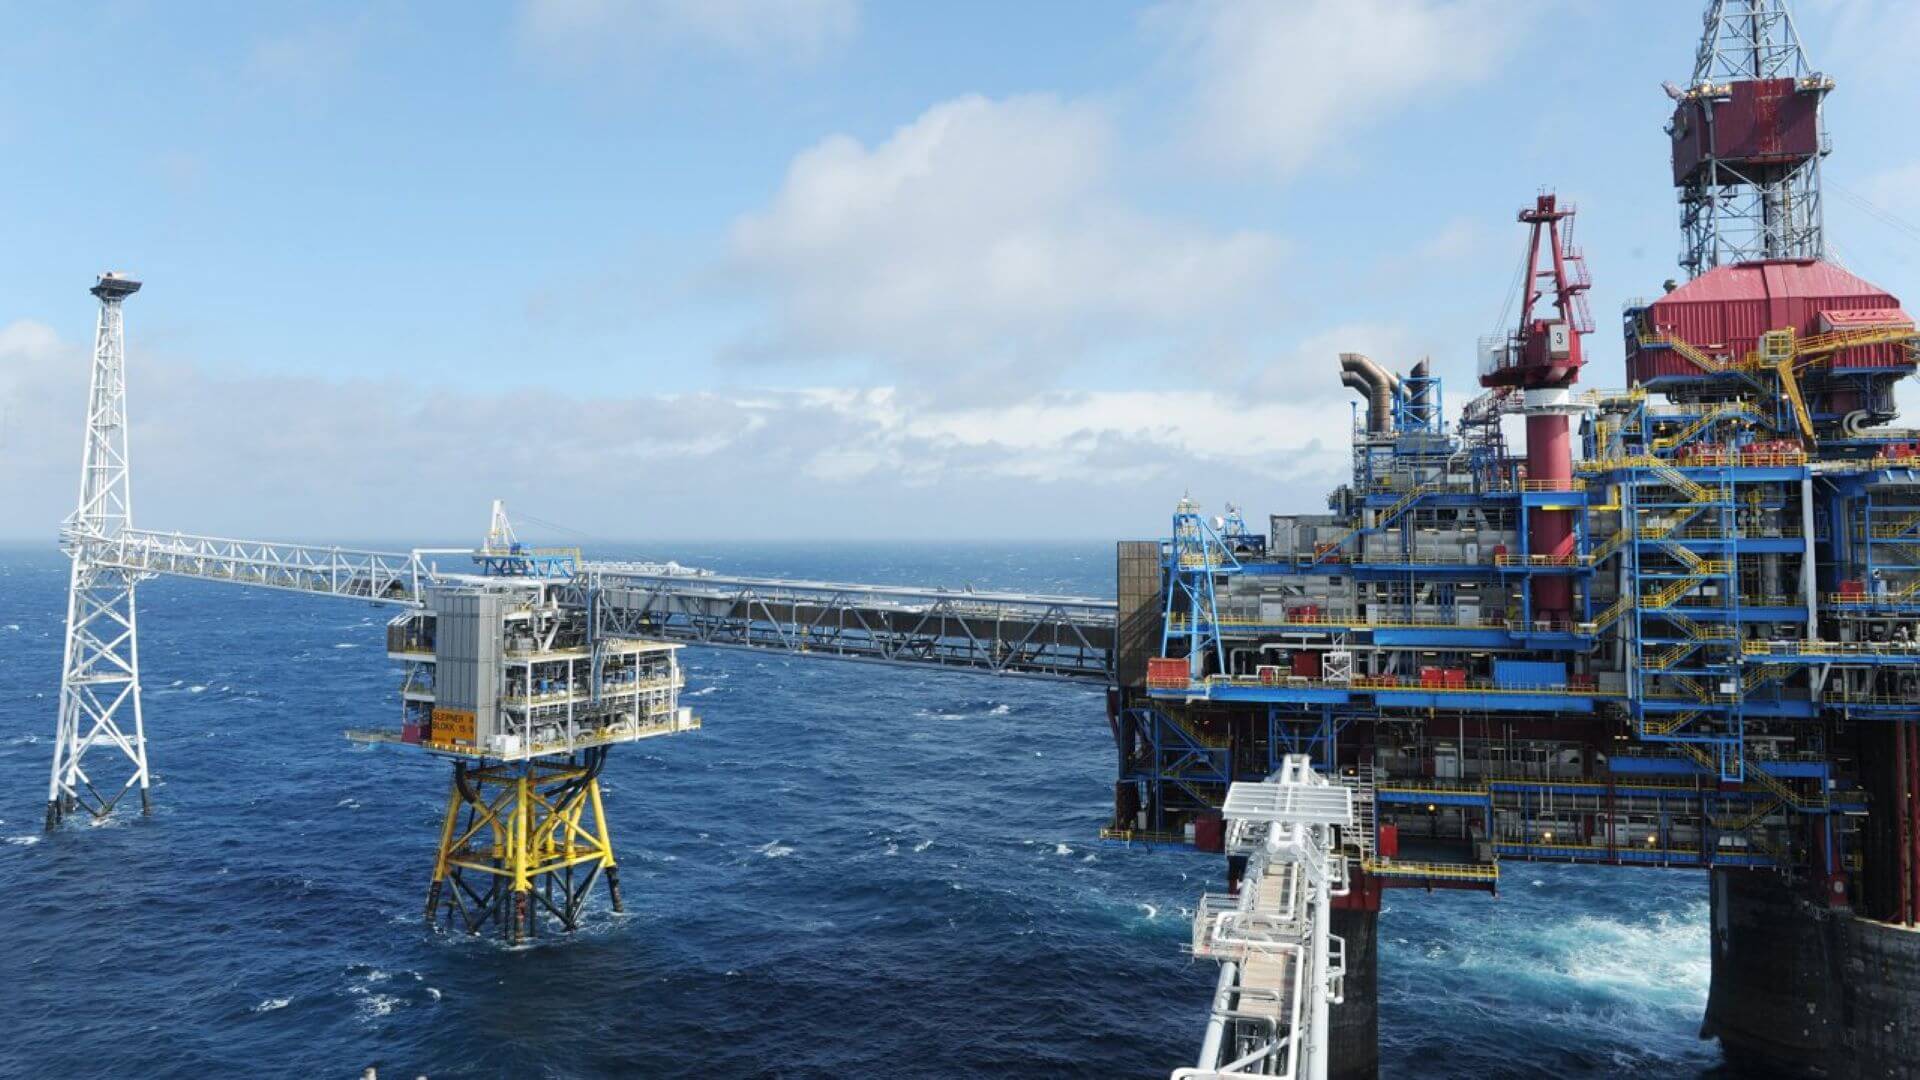 Sleipner oil and gas facilities at sea